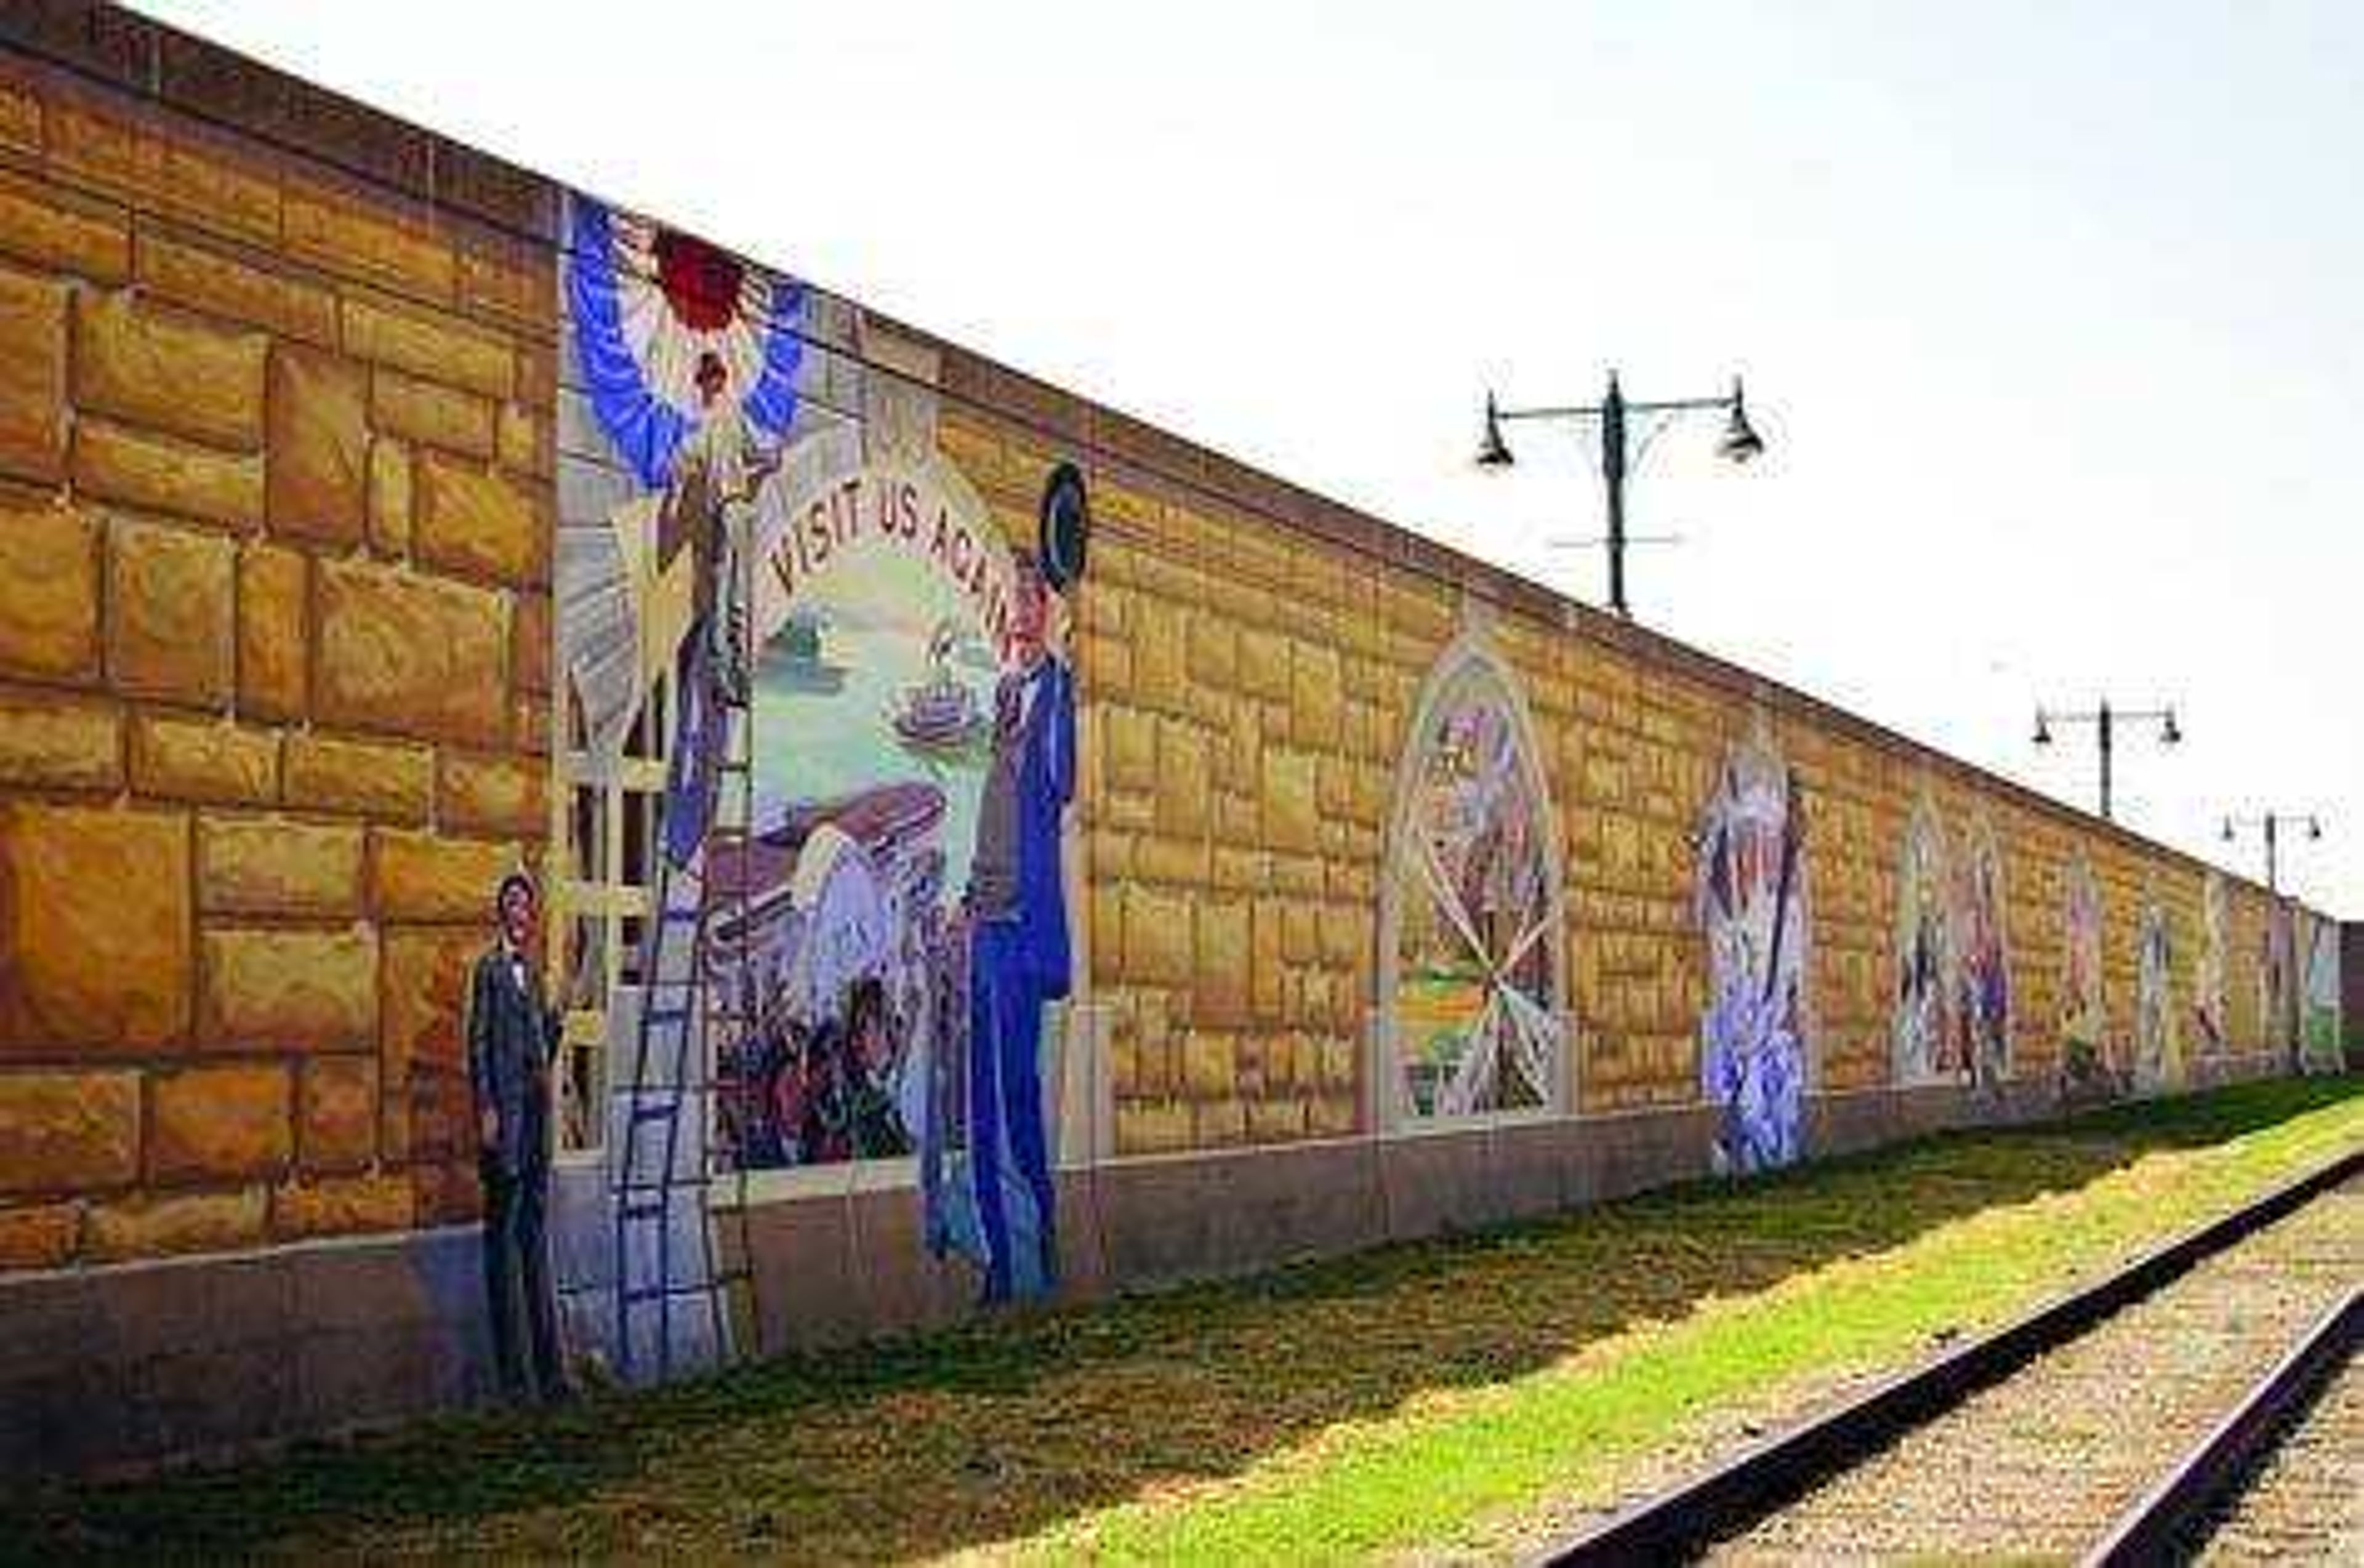 The Mississippi River Tales Mural runs 1,100 feet along the flood wall. - Photo by Nathan Hamilton